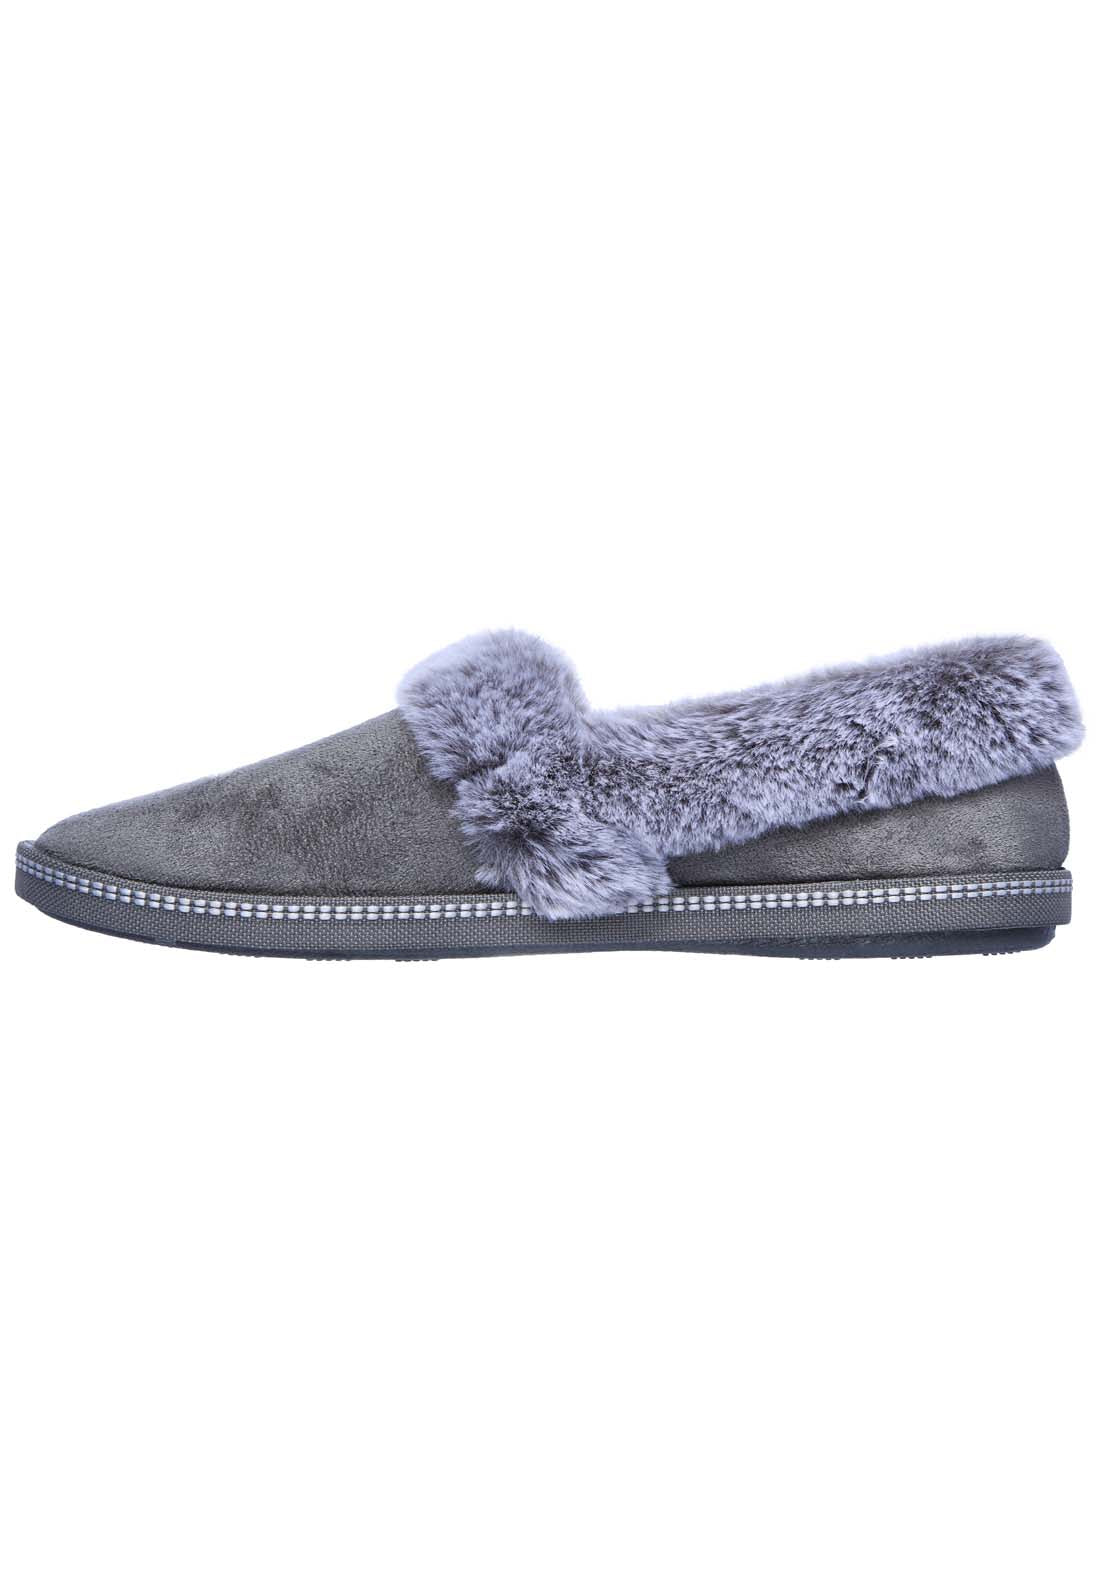 Skechers Cosy Campfire Slipper - Grey 2 Shaws Department Stores